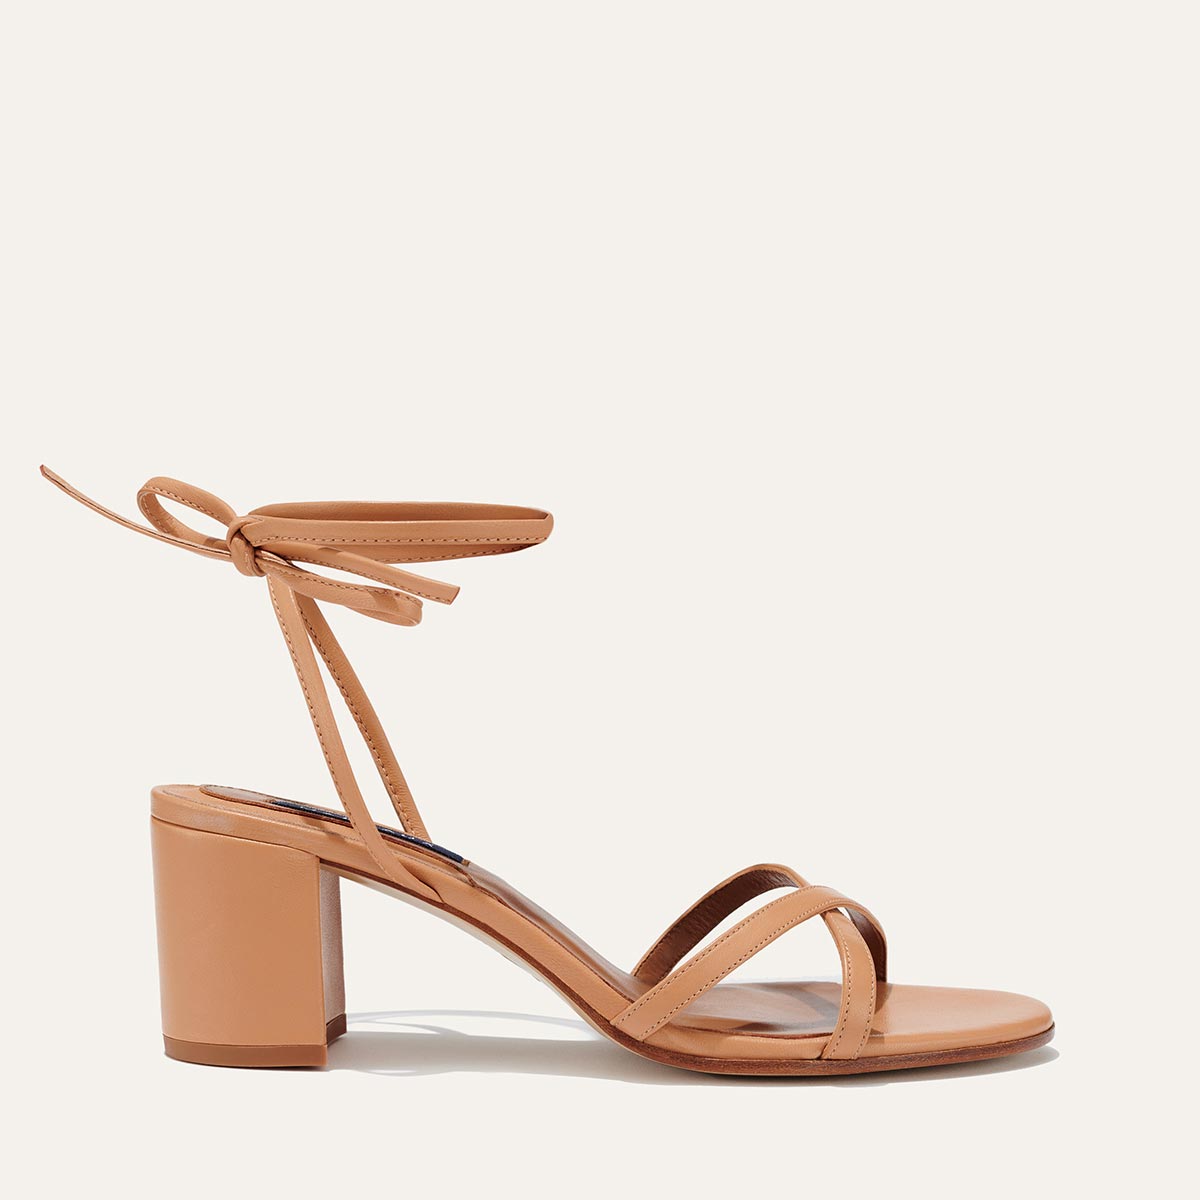 Margaux's strappy Soho Sandal with ankle ties, made in Spain from soft, nude Italian nappa leather